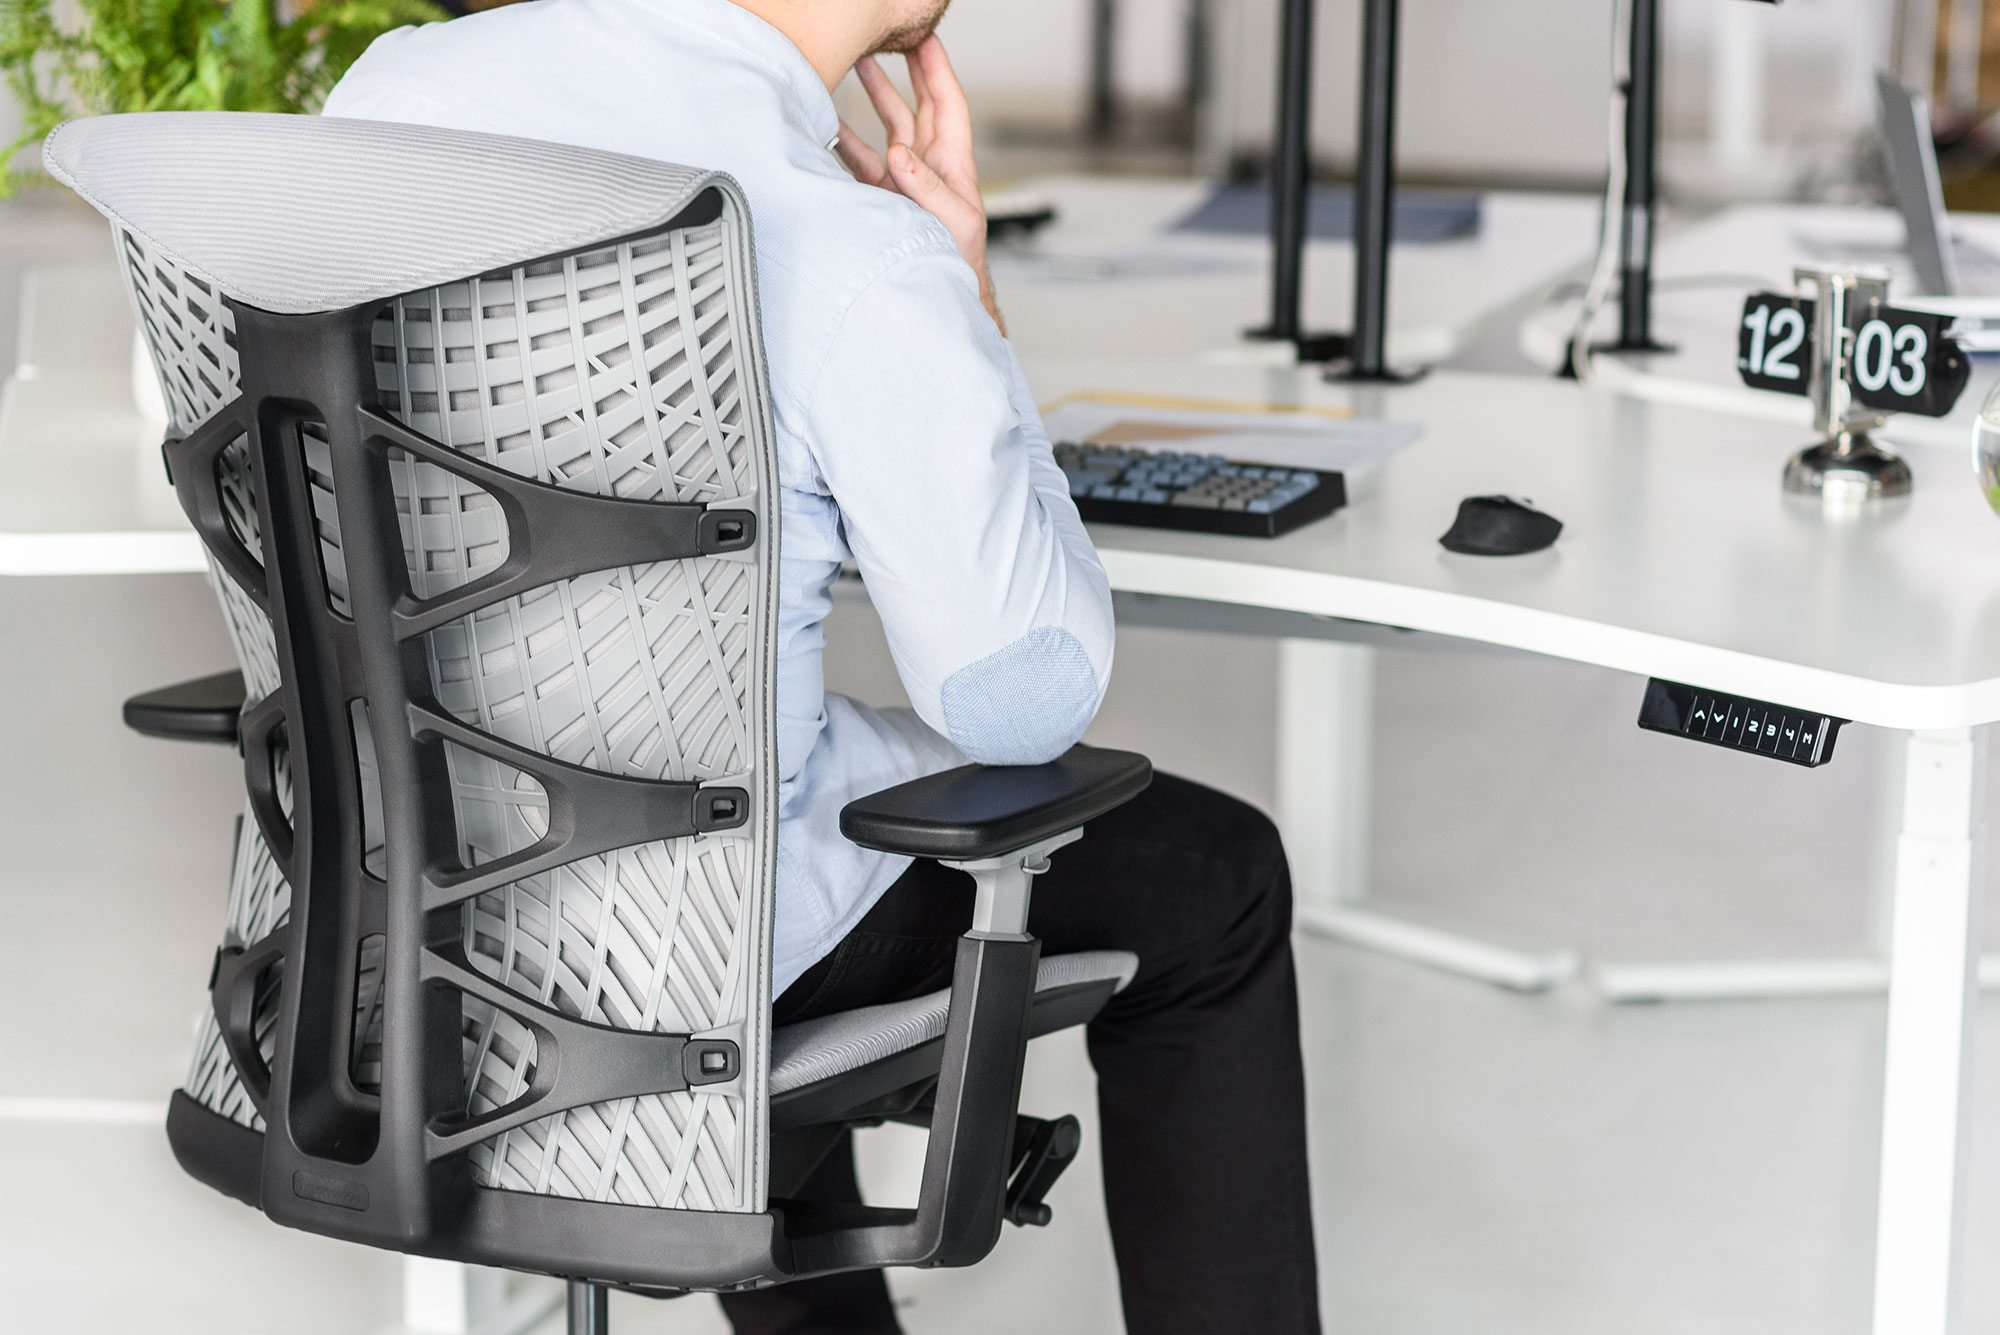 Ergochair Pro The Best Ergonomic Chair To Move More And Feel Better